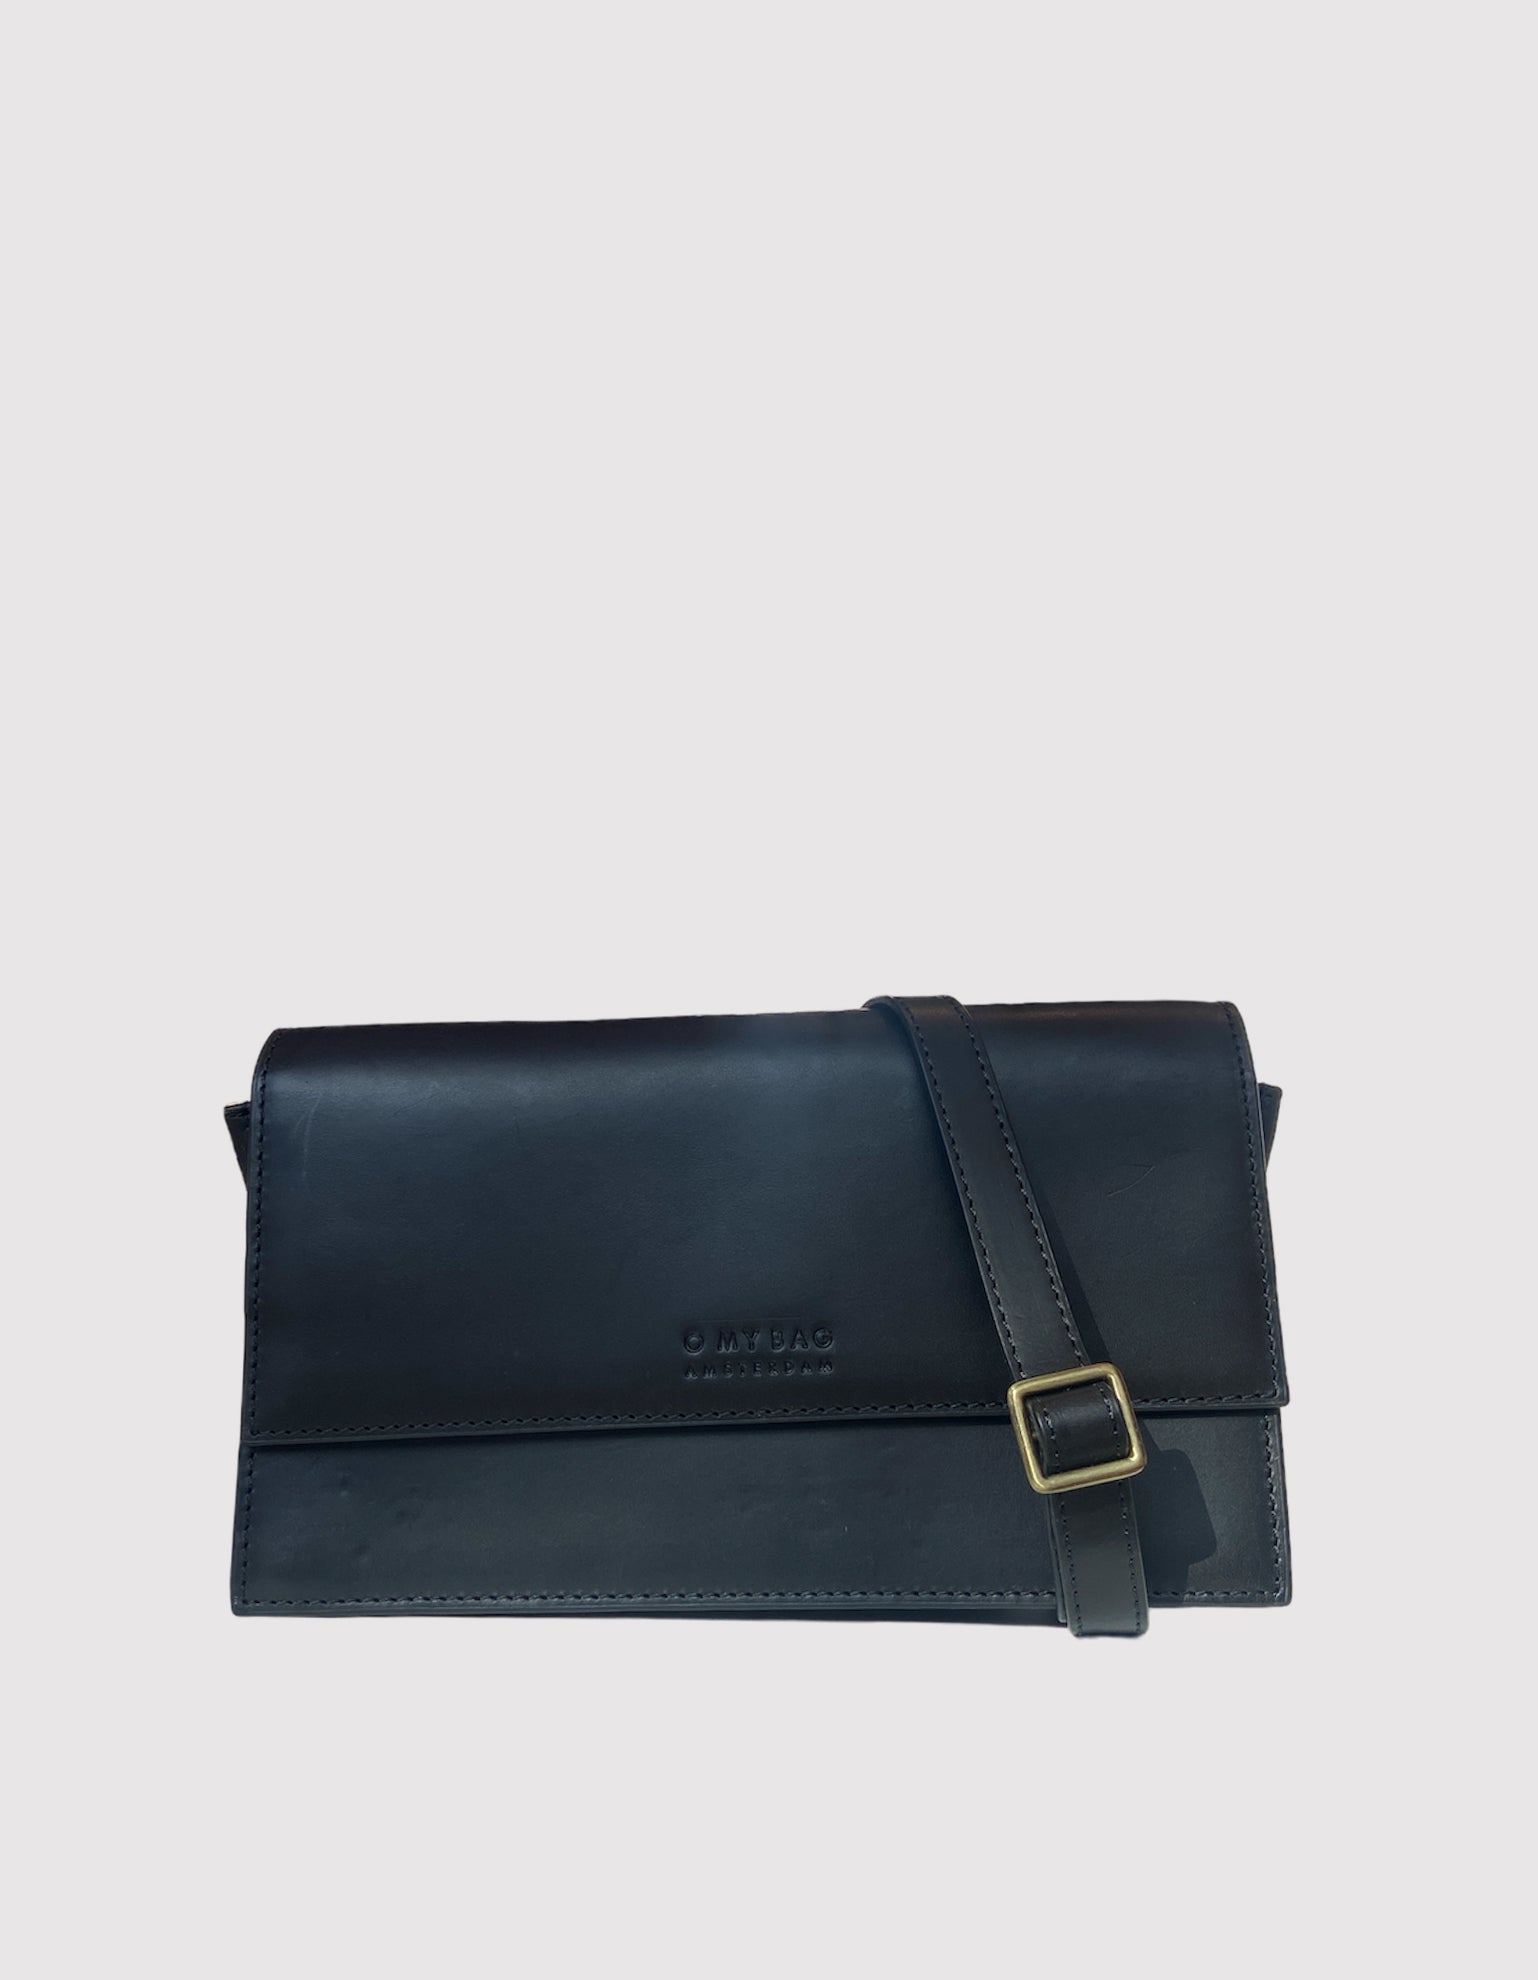 Perfectly Imperfect Stella - Black Classic Leather